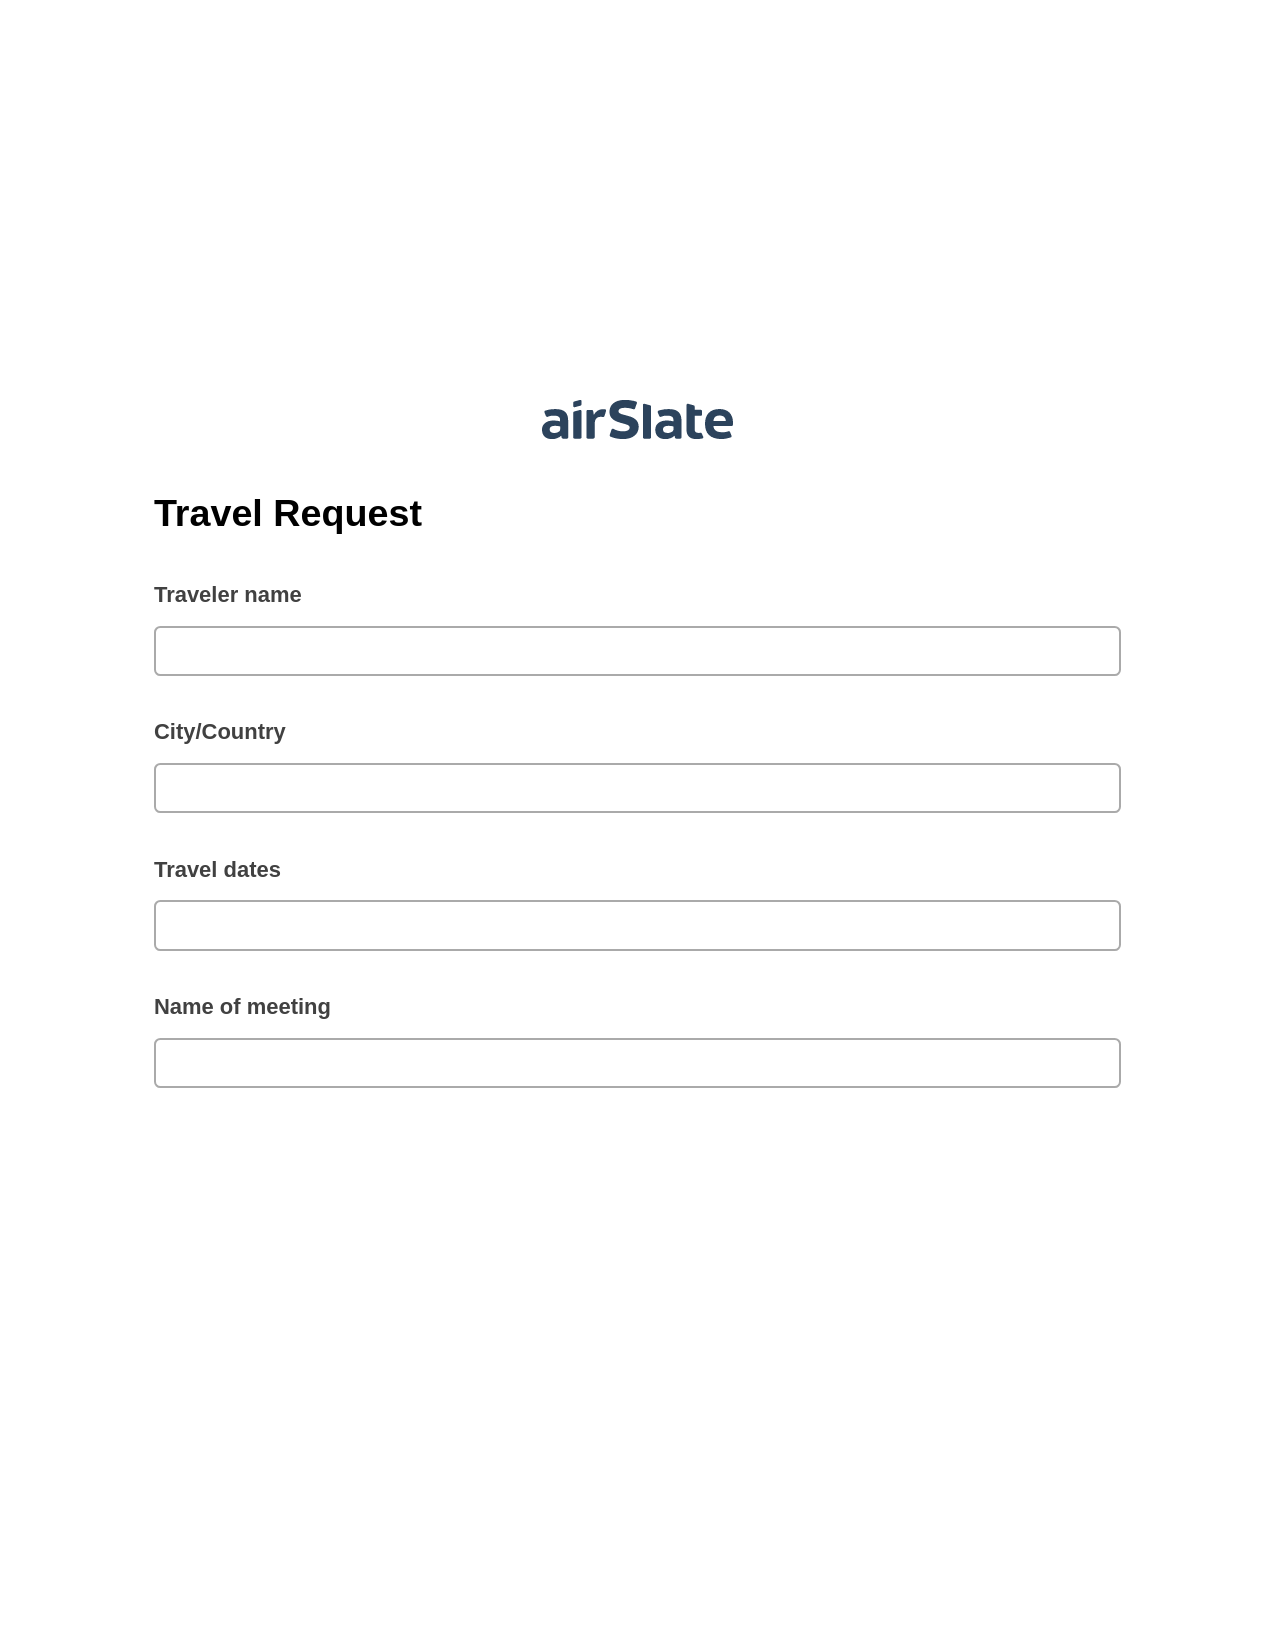 Multirole Travel Request Pre-fill from CSV File Bot, Unassign Role Bot, Export to Salesforce Bot